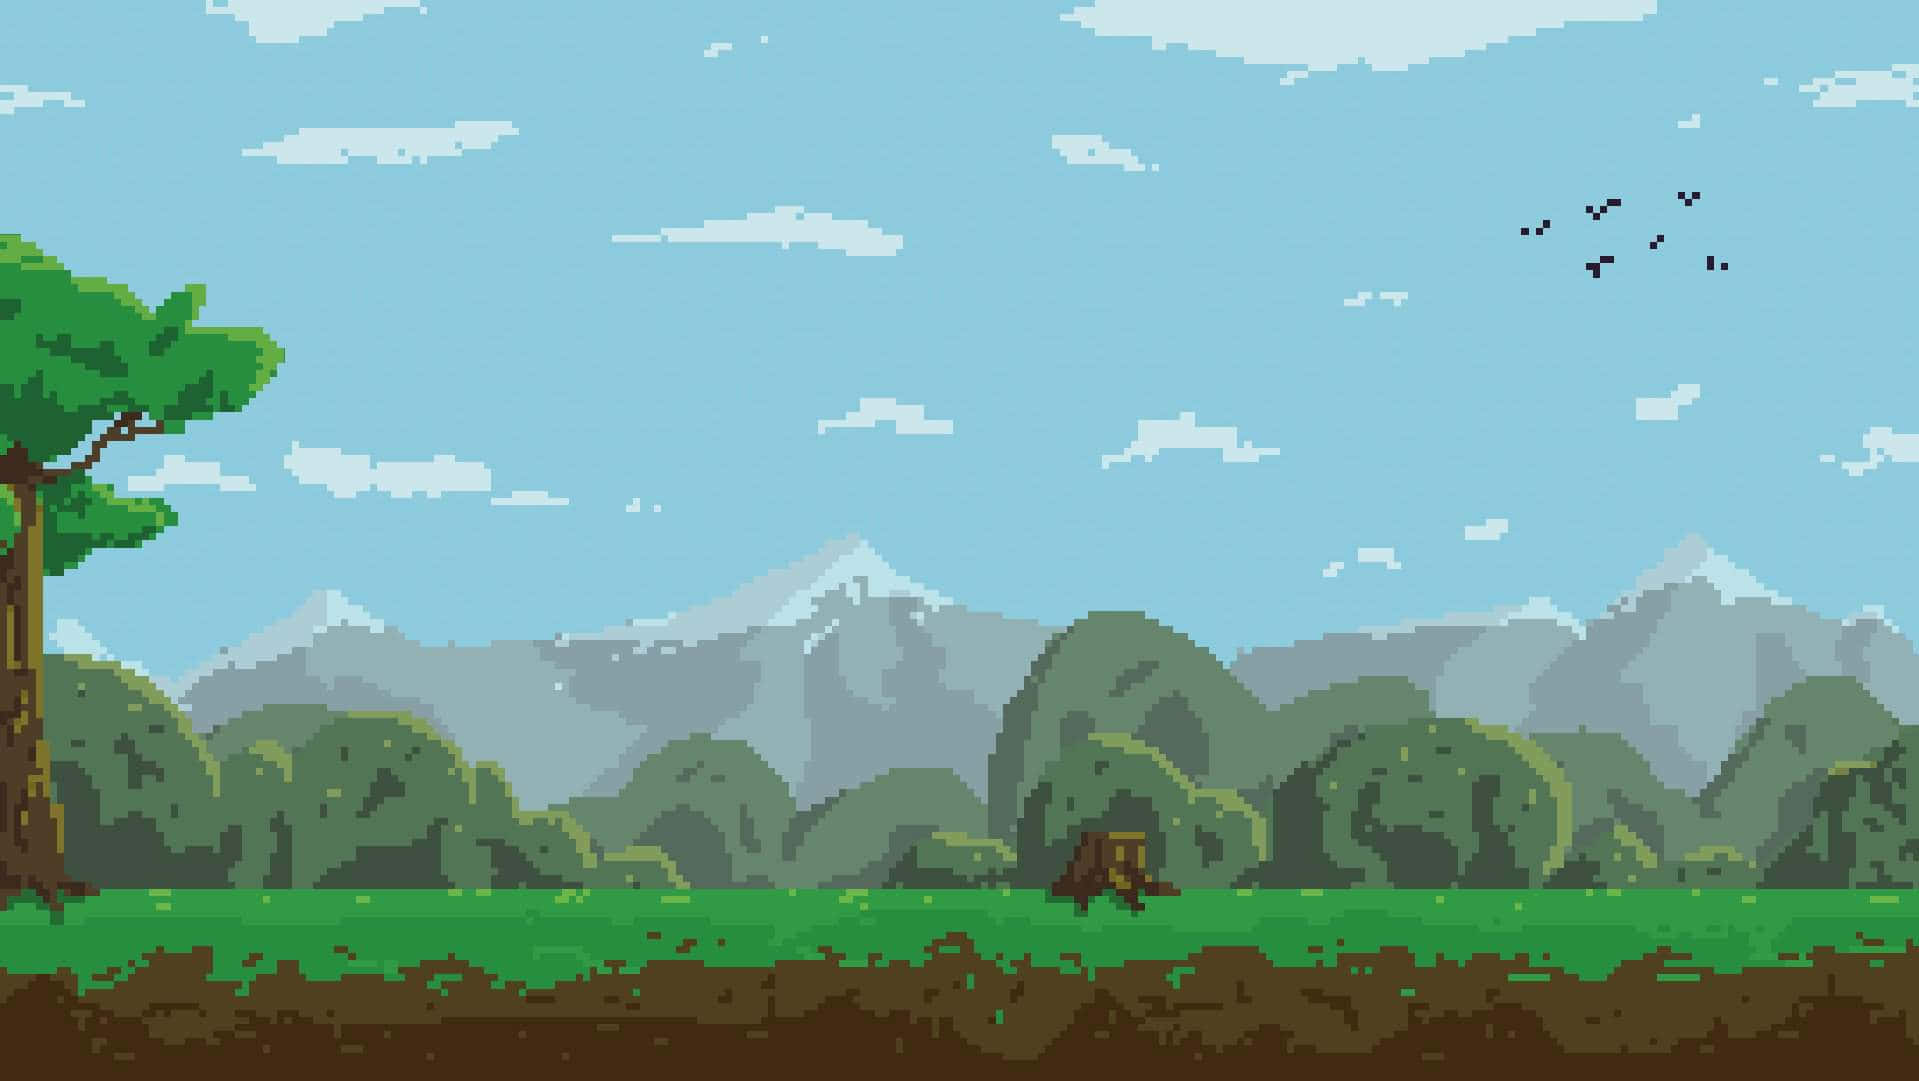 This HD pixel art wallpaper is the perfect backdrop